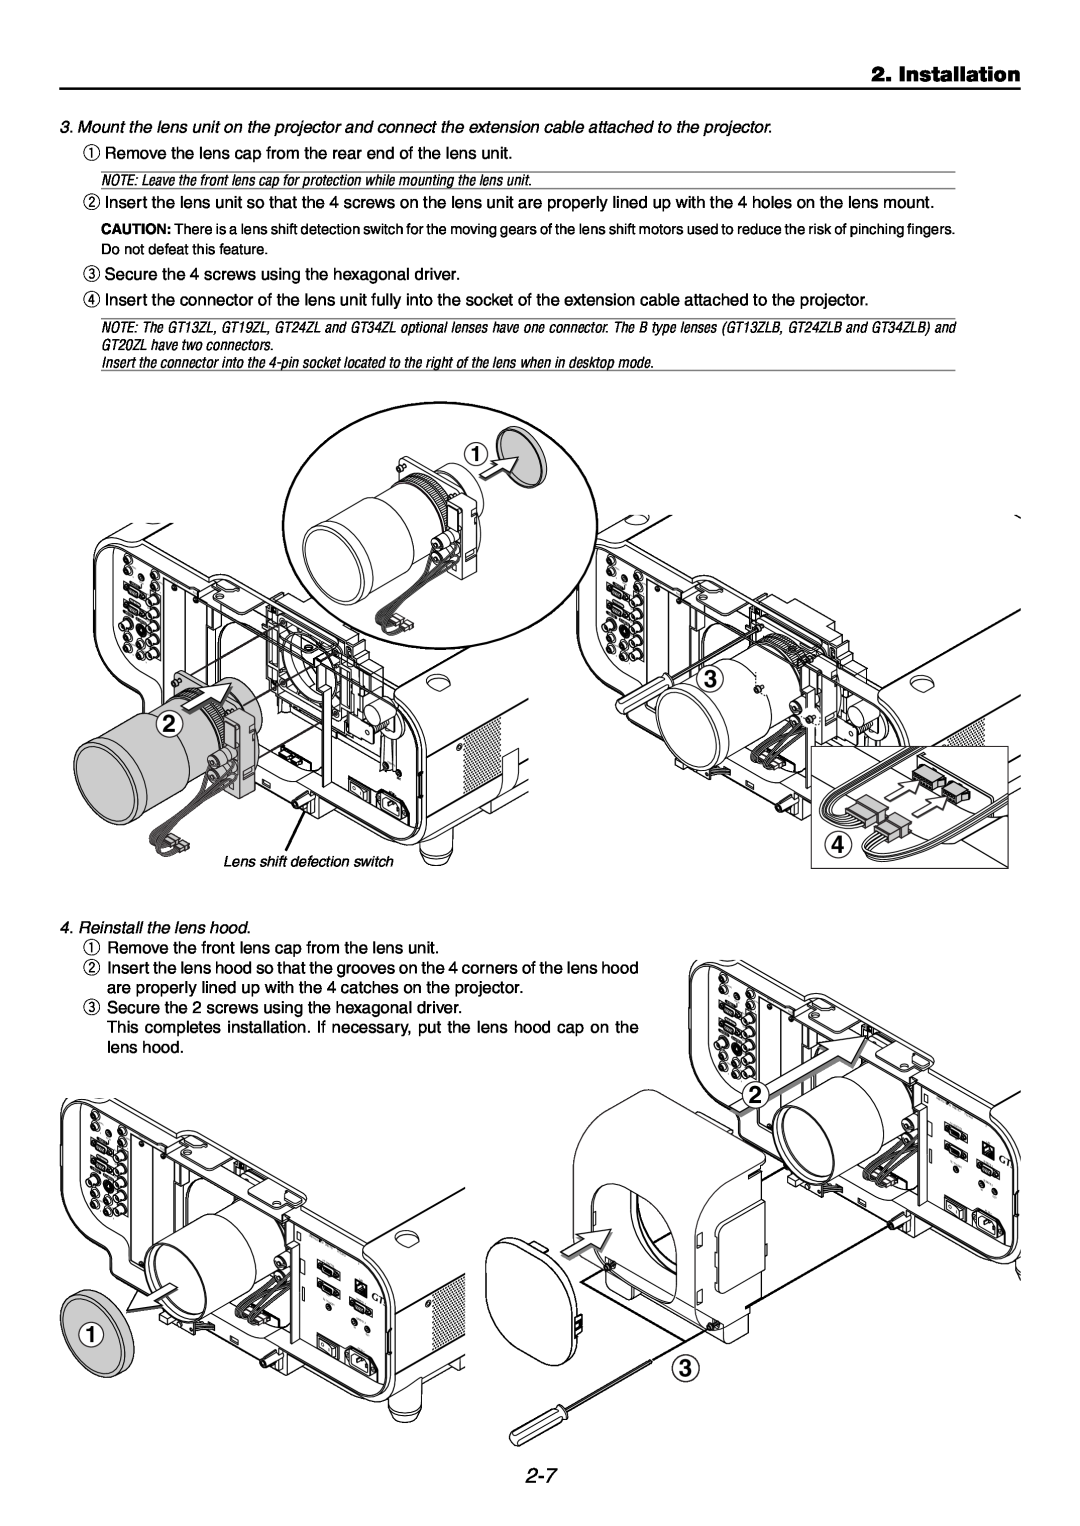 NEC GT6000 user manual Installation, e Secure the 4 screws using the hexagonal driver 